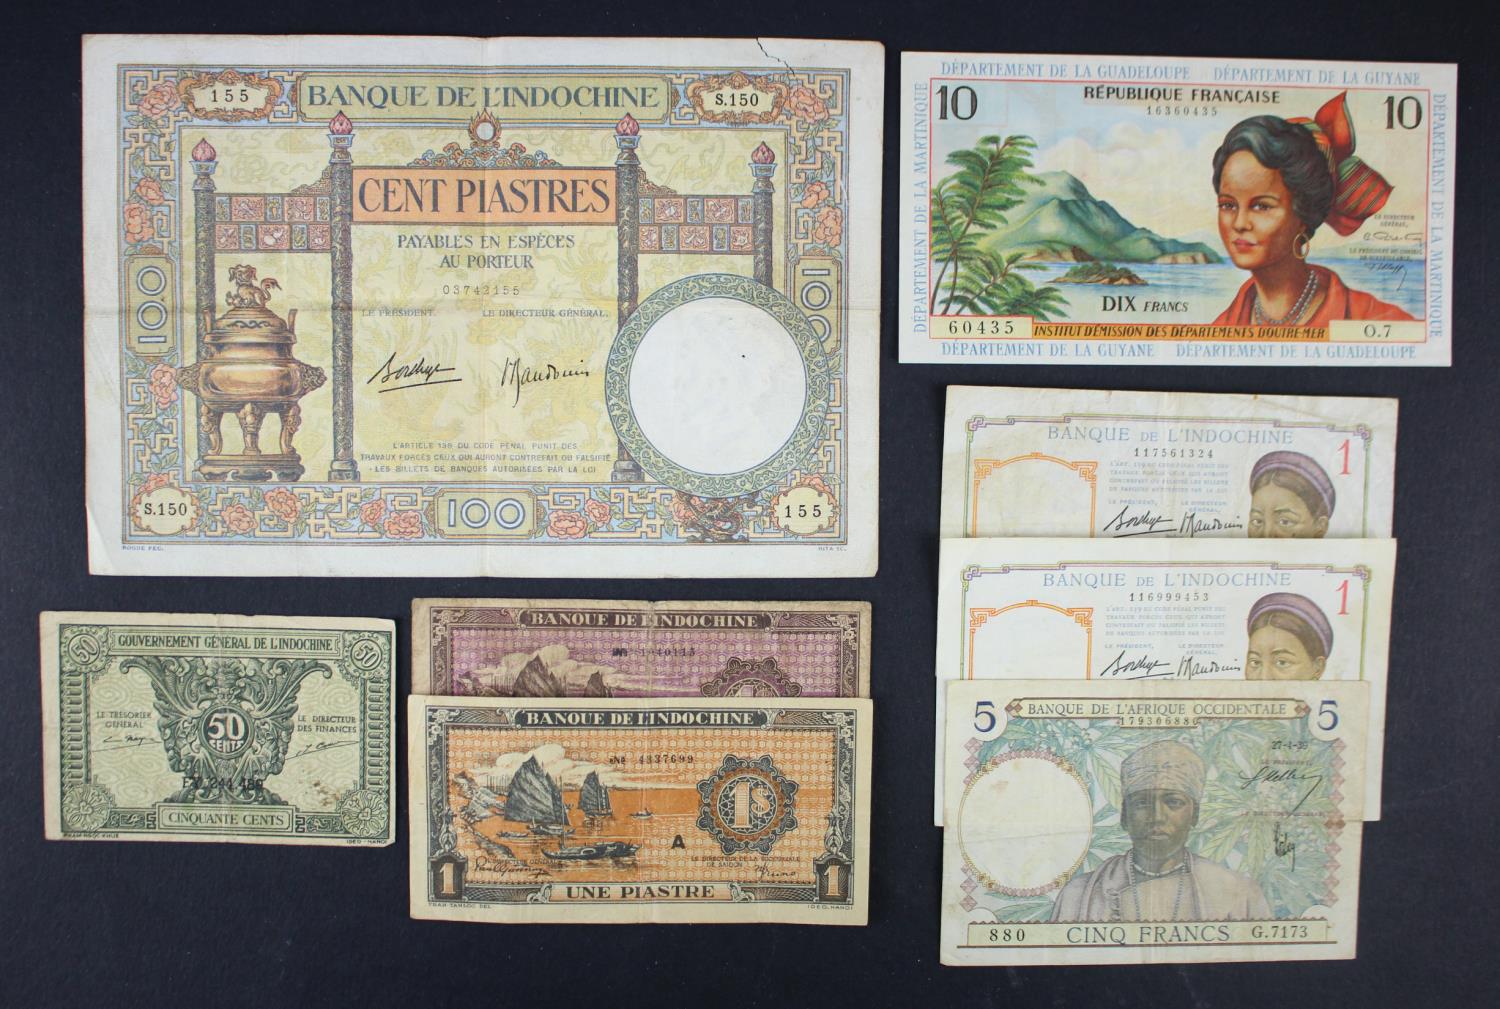 French Colonies (8), French Antilles 10 Francs 1964, French Indochina 100 Piastres 1936 - 1939, 1